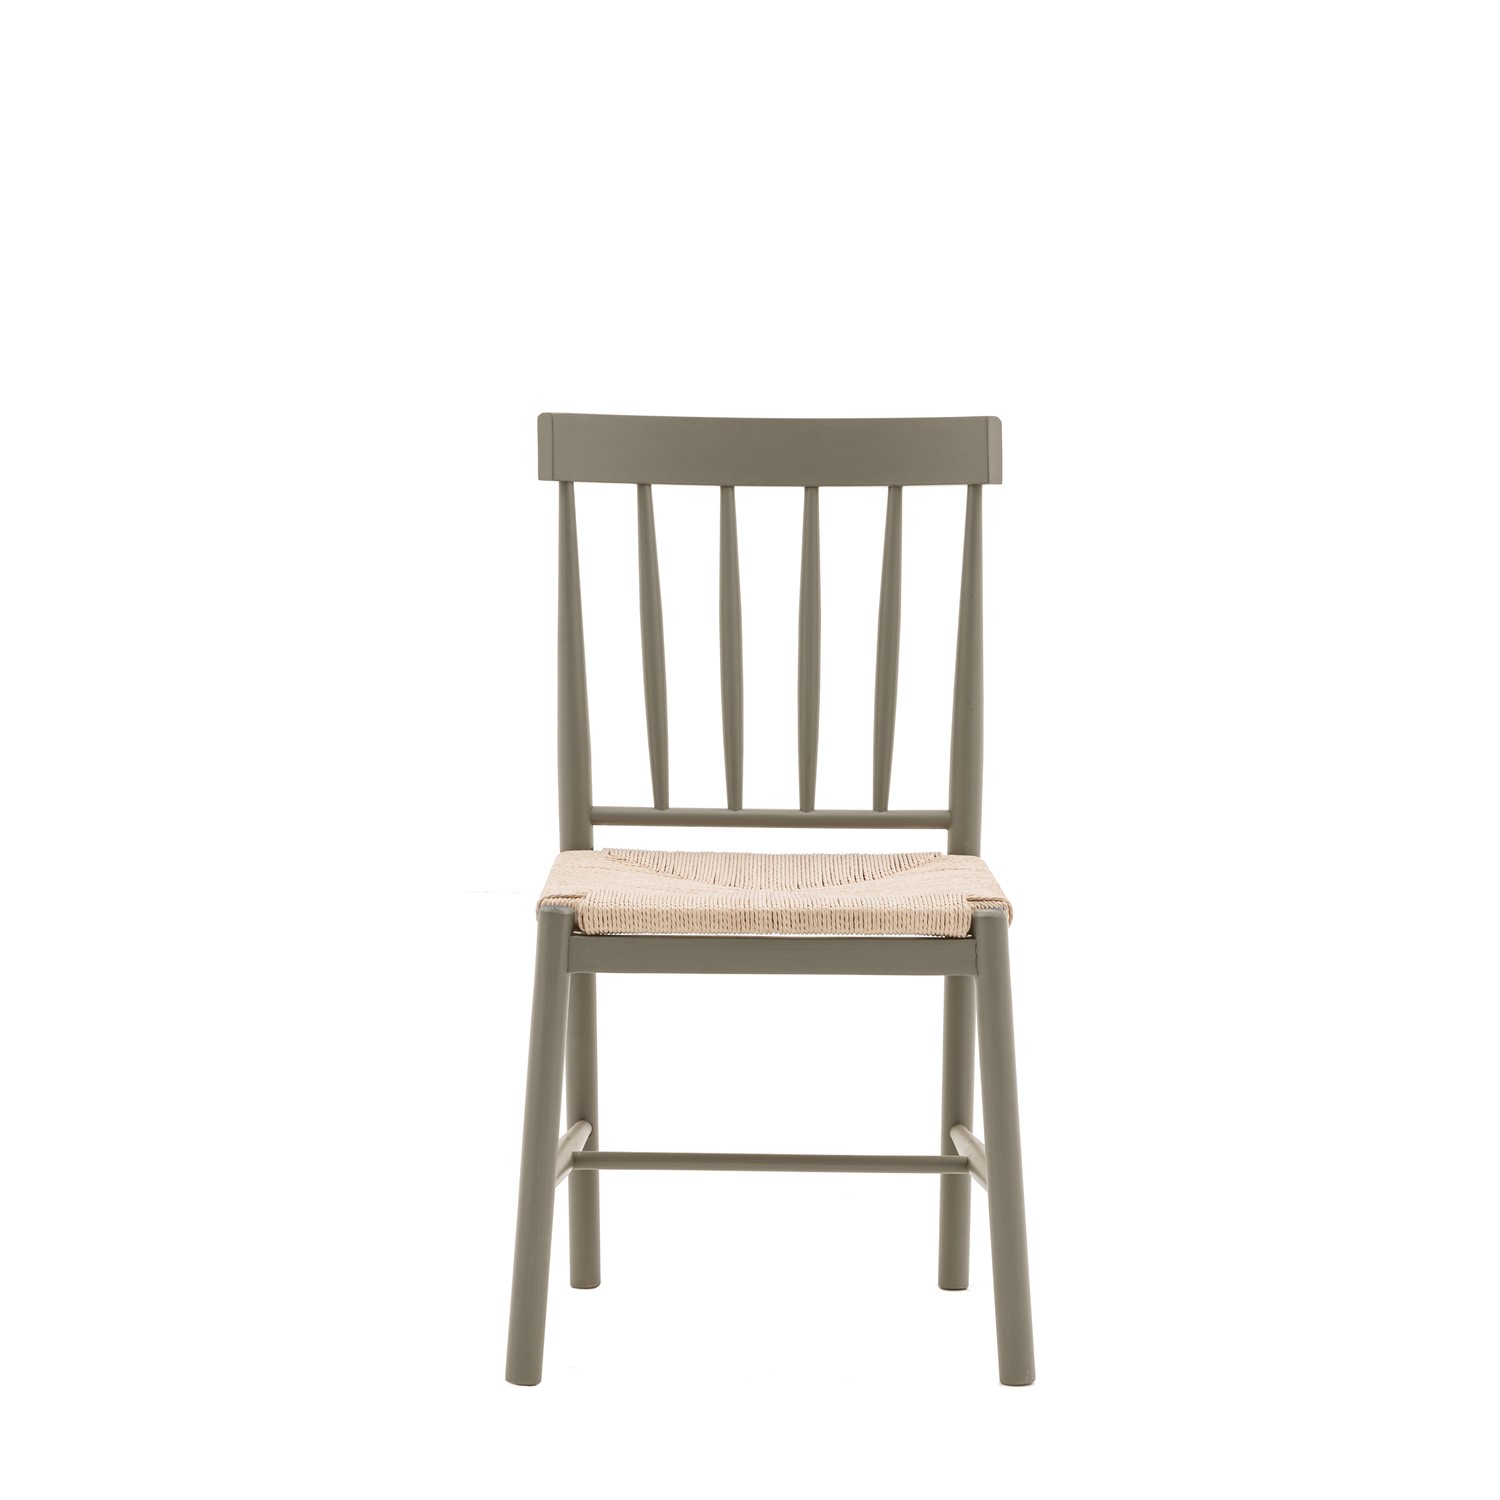 Read more about Eton dining chairs set of 2 sage green caspian house